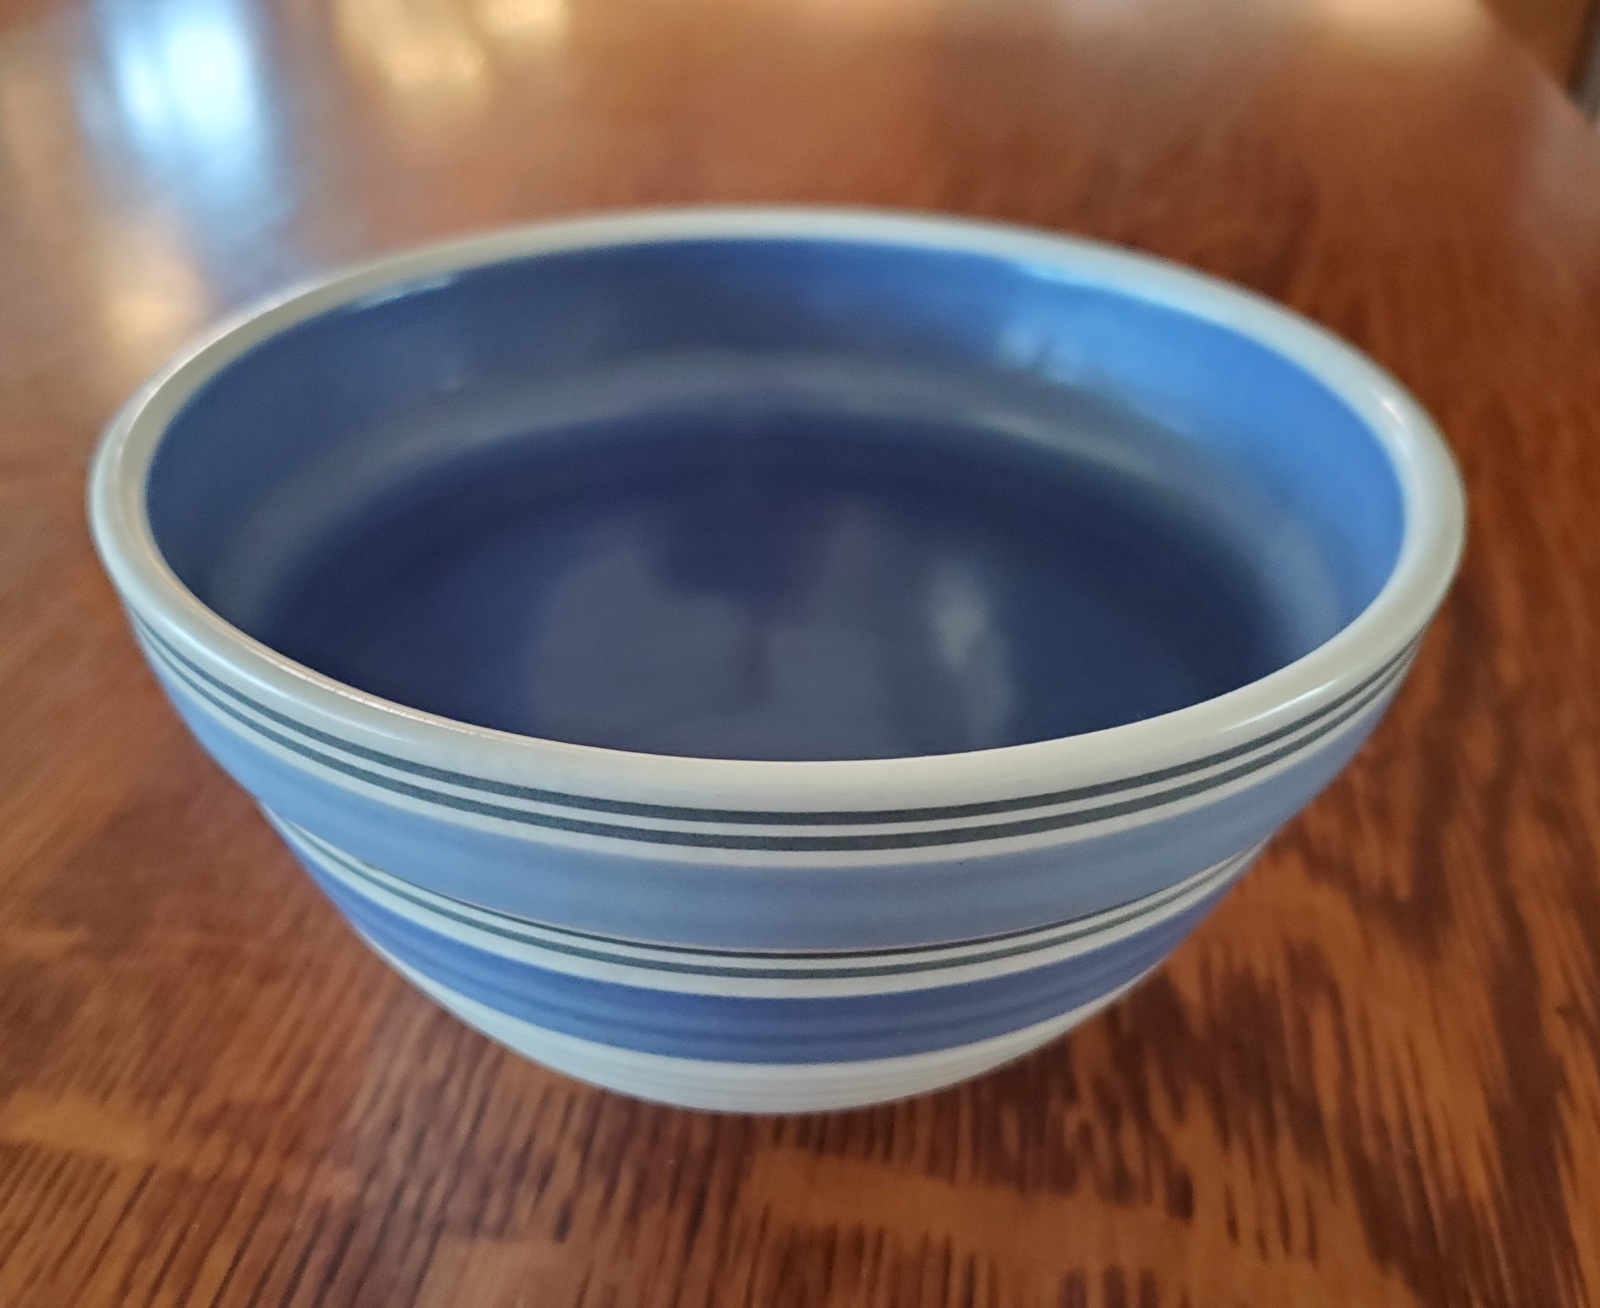 Primary image for Pfaltzgraff Rio Soup/Cereal Bowl